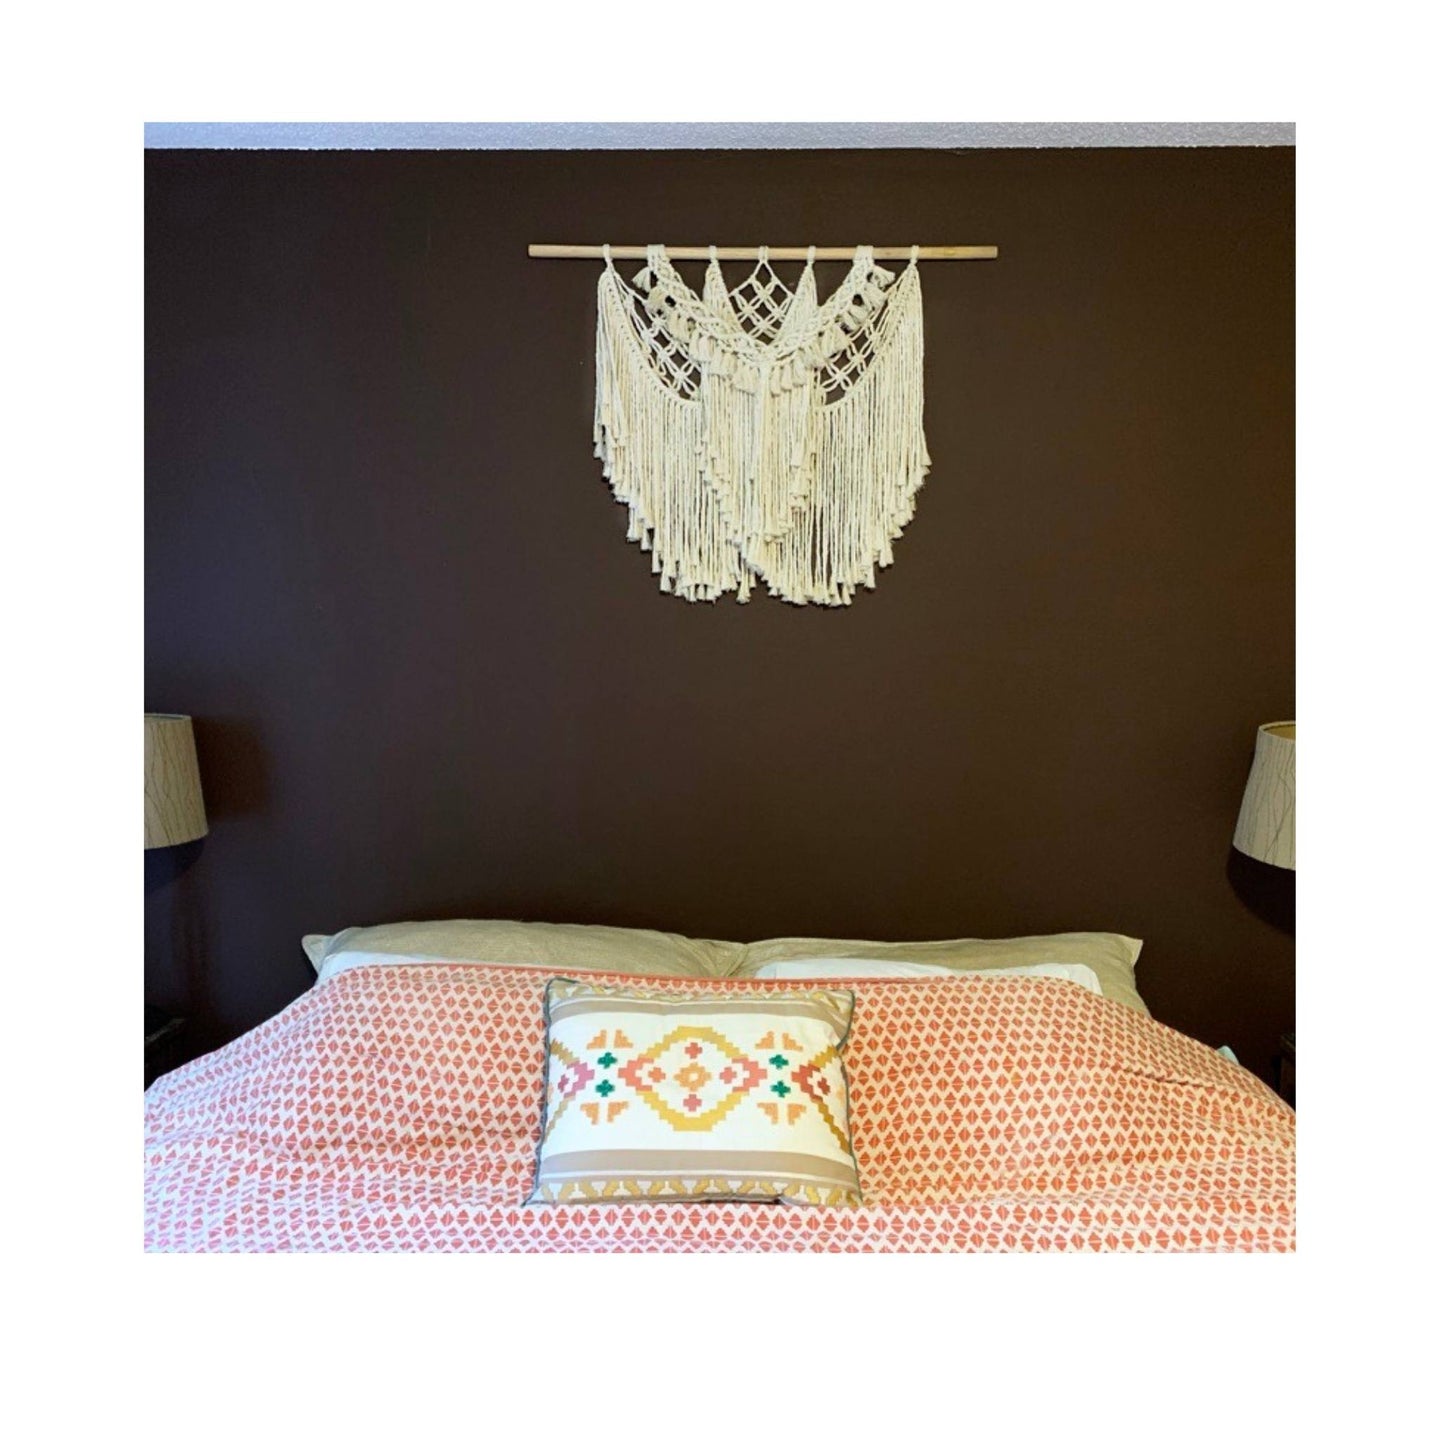 This macrame fiber art Resilient looks gorgeous over this king bed